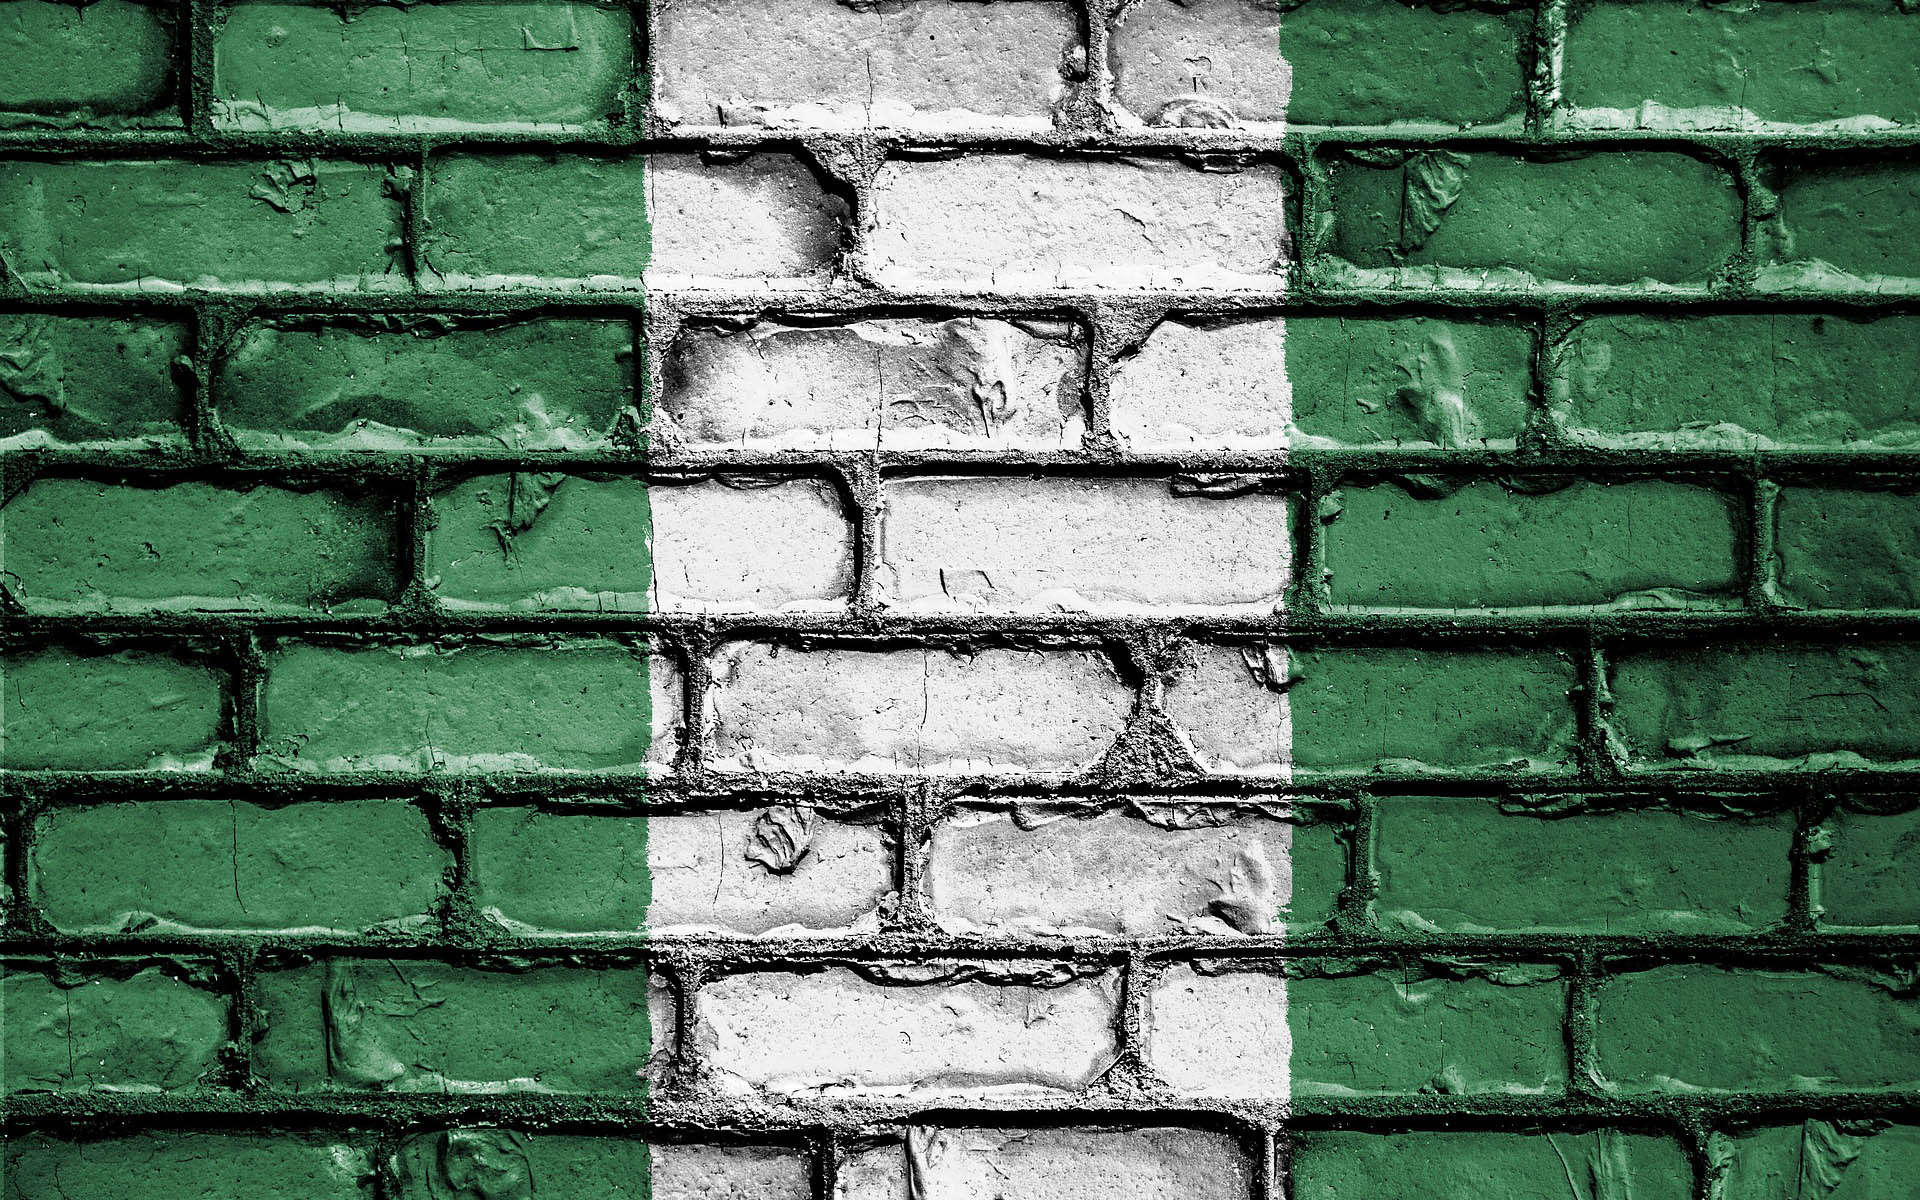 Nigerian Bitcoin Scam Makes Off with Millions (Again)